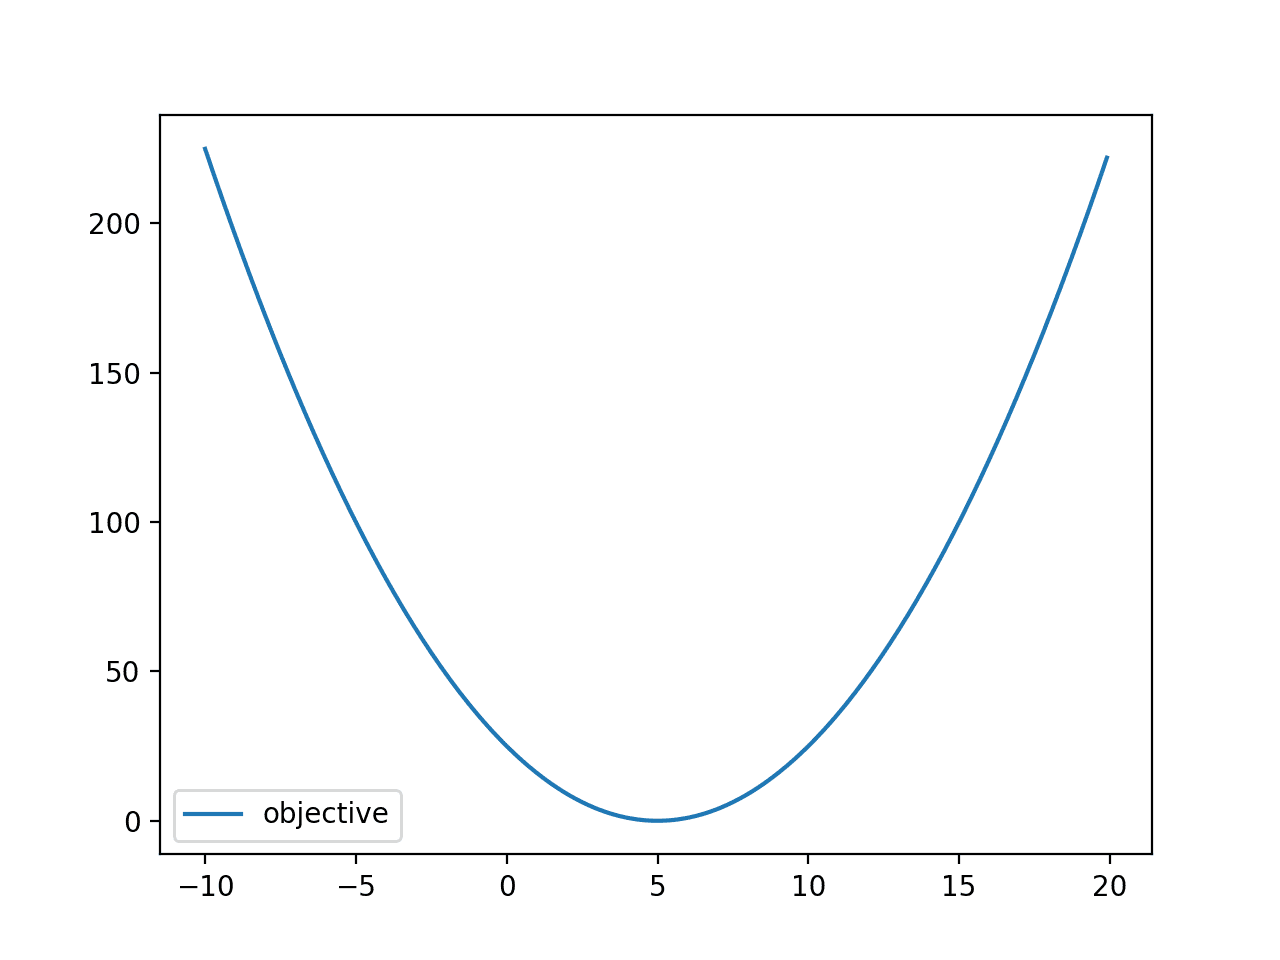 Line Plot of Convex Objective Function